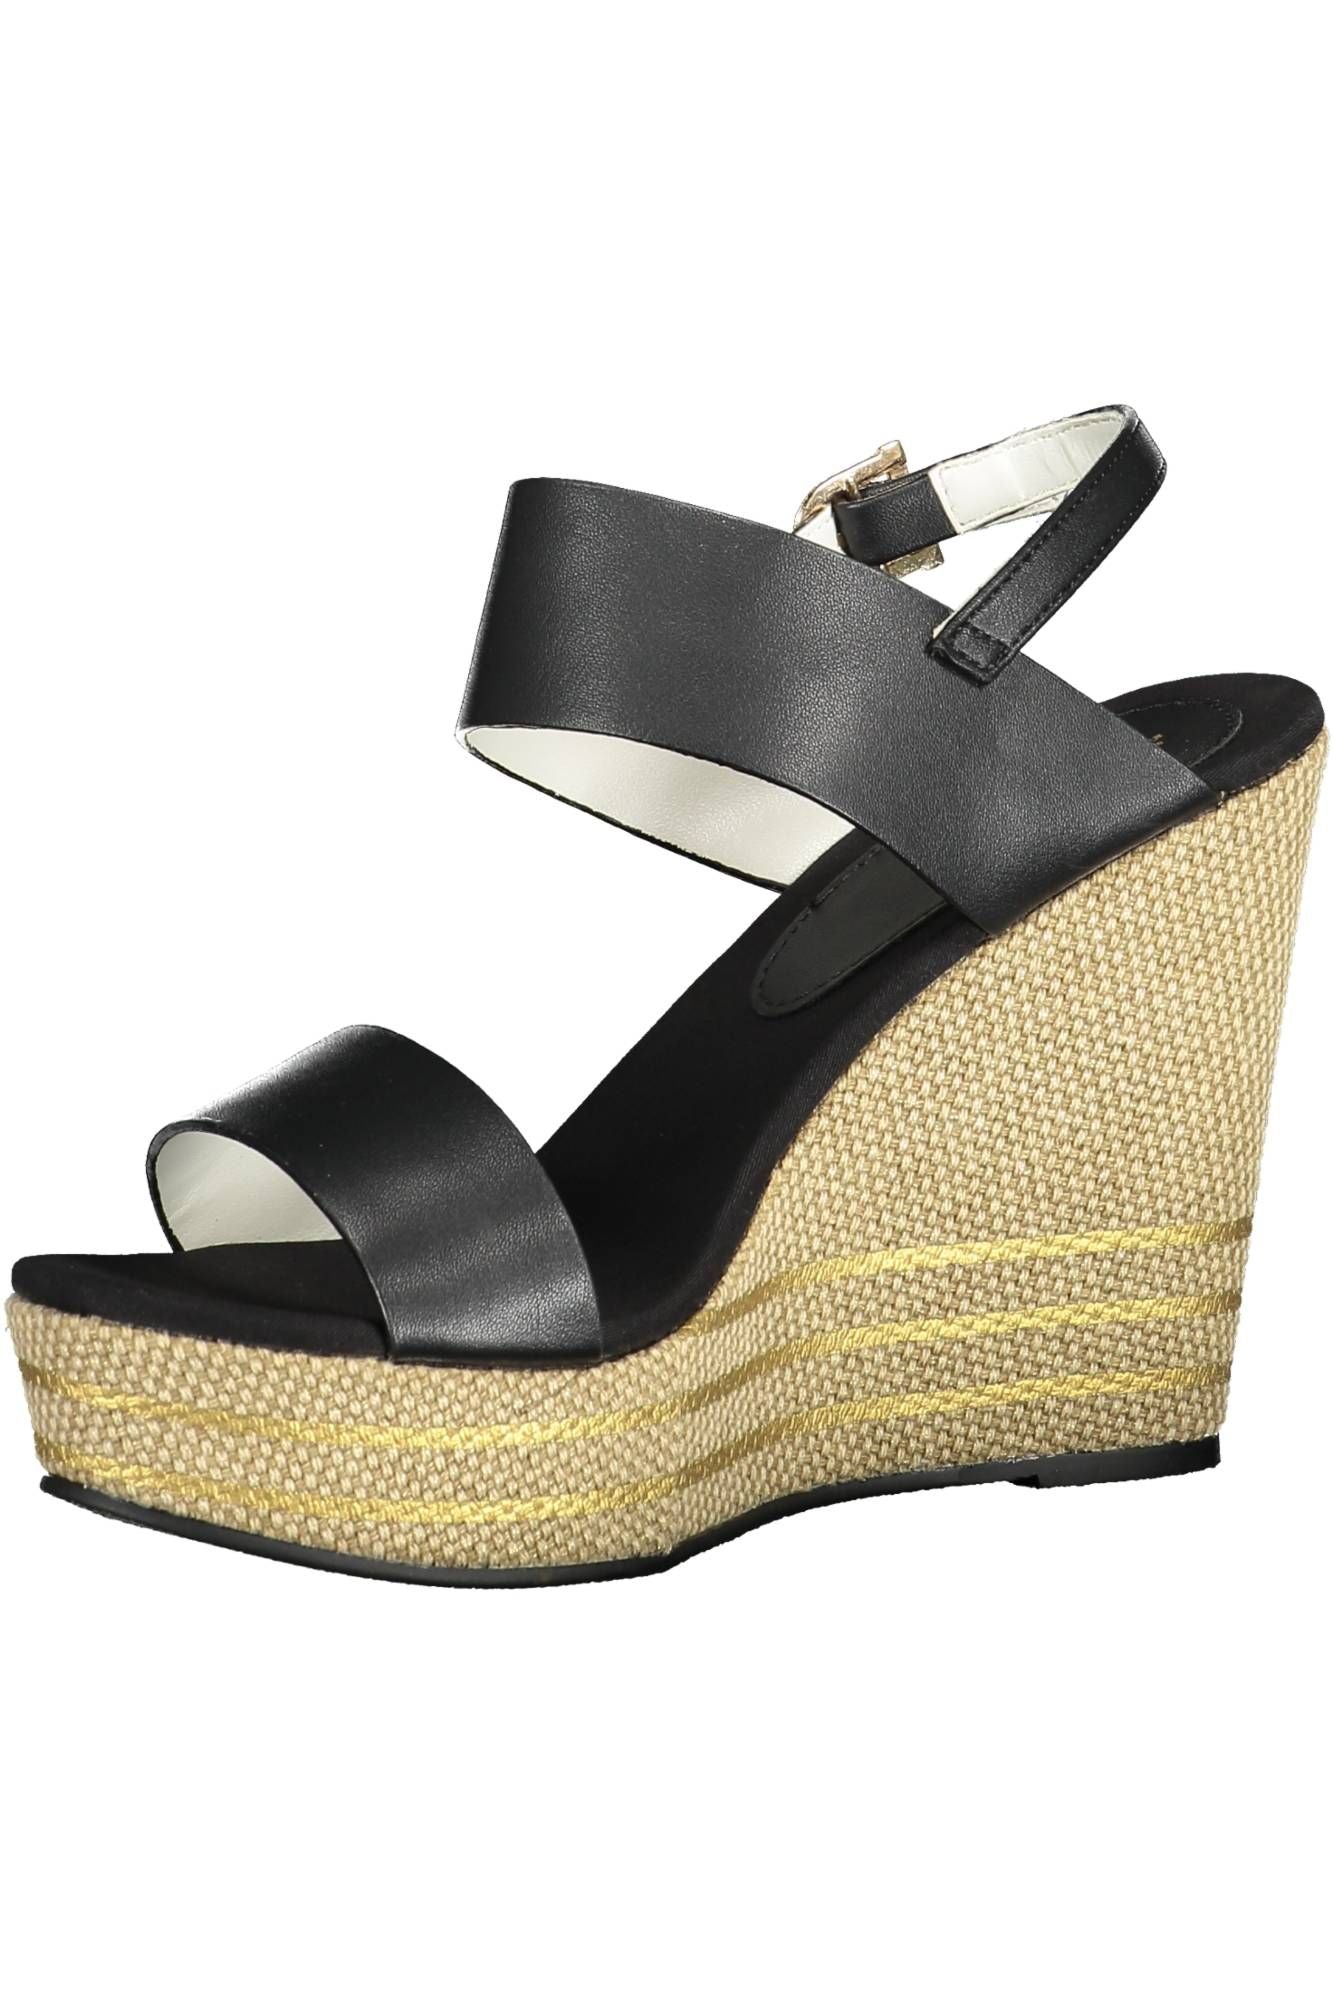 Chic Ankle Buckle Wedge Sandals